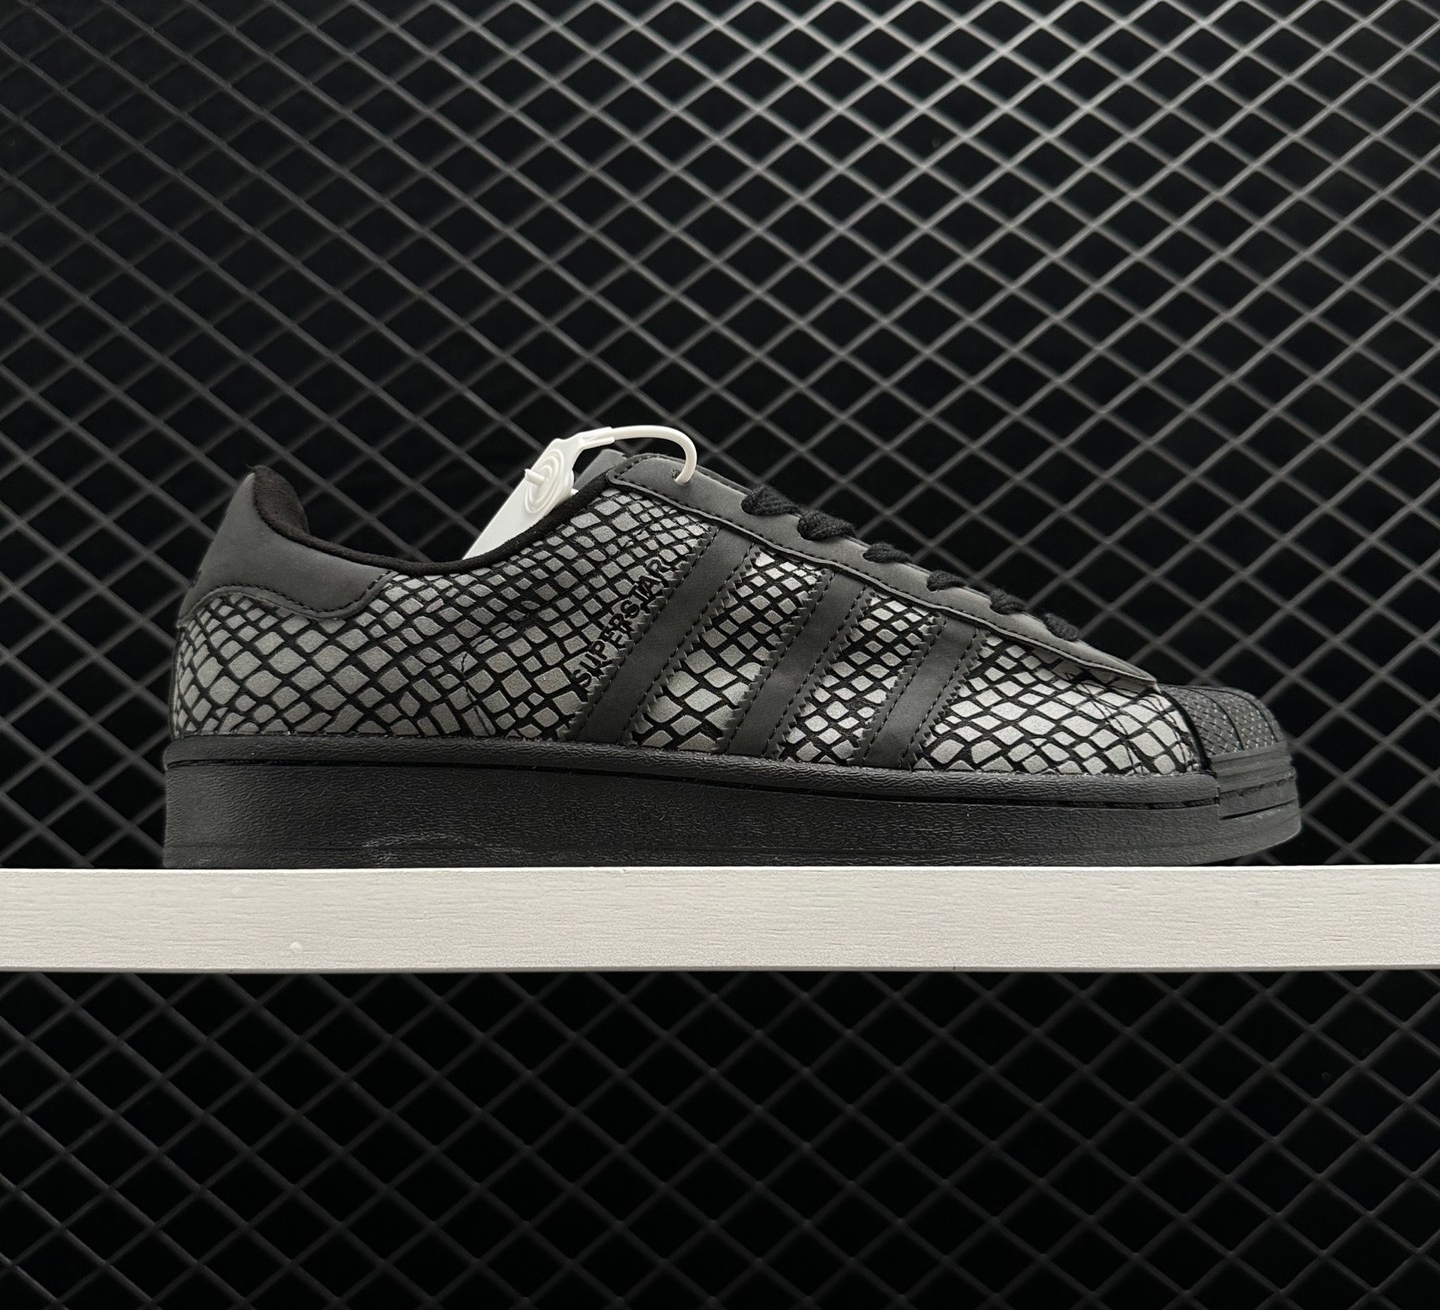 Adidas Atmos x Superstar 'R-SNK' FY6014 - Limited Edition Sneakers